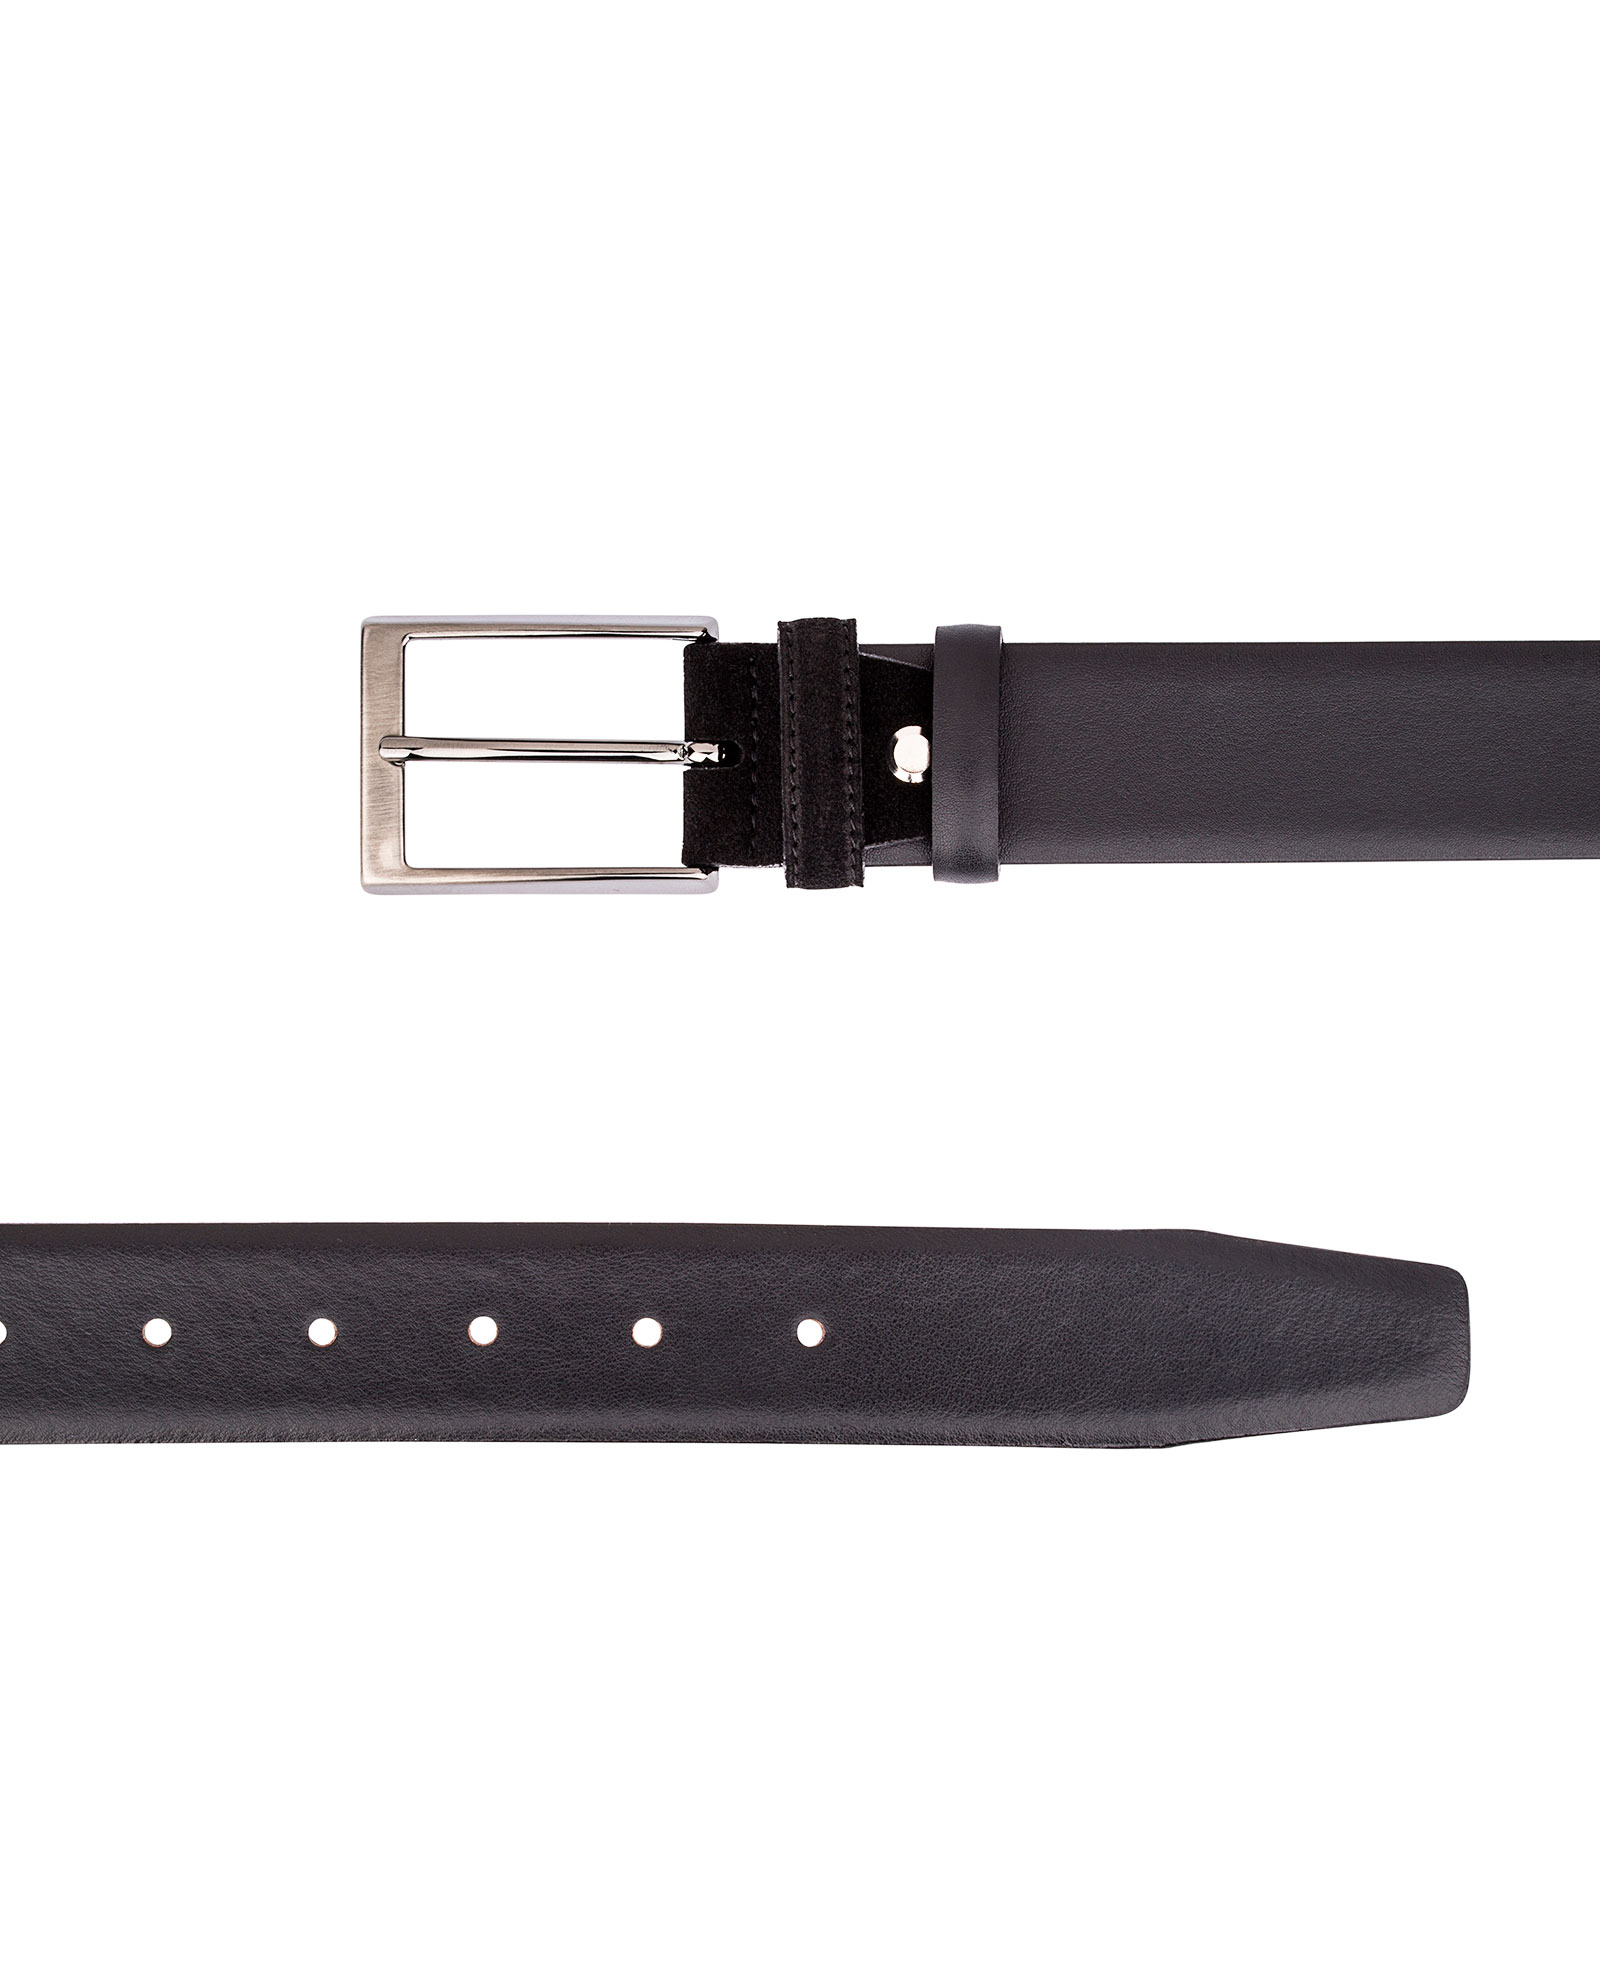 Buy Black Smooth Leather Belt with Suede | Free Shipping Worldwide